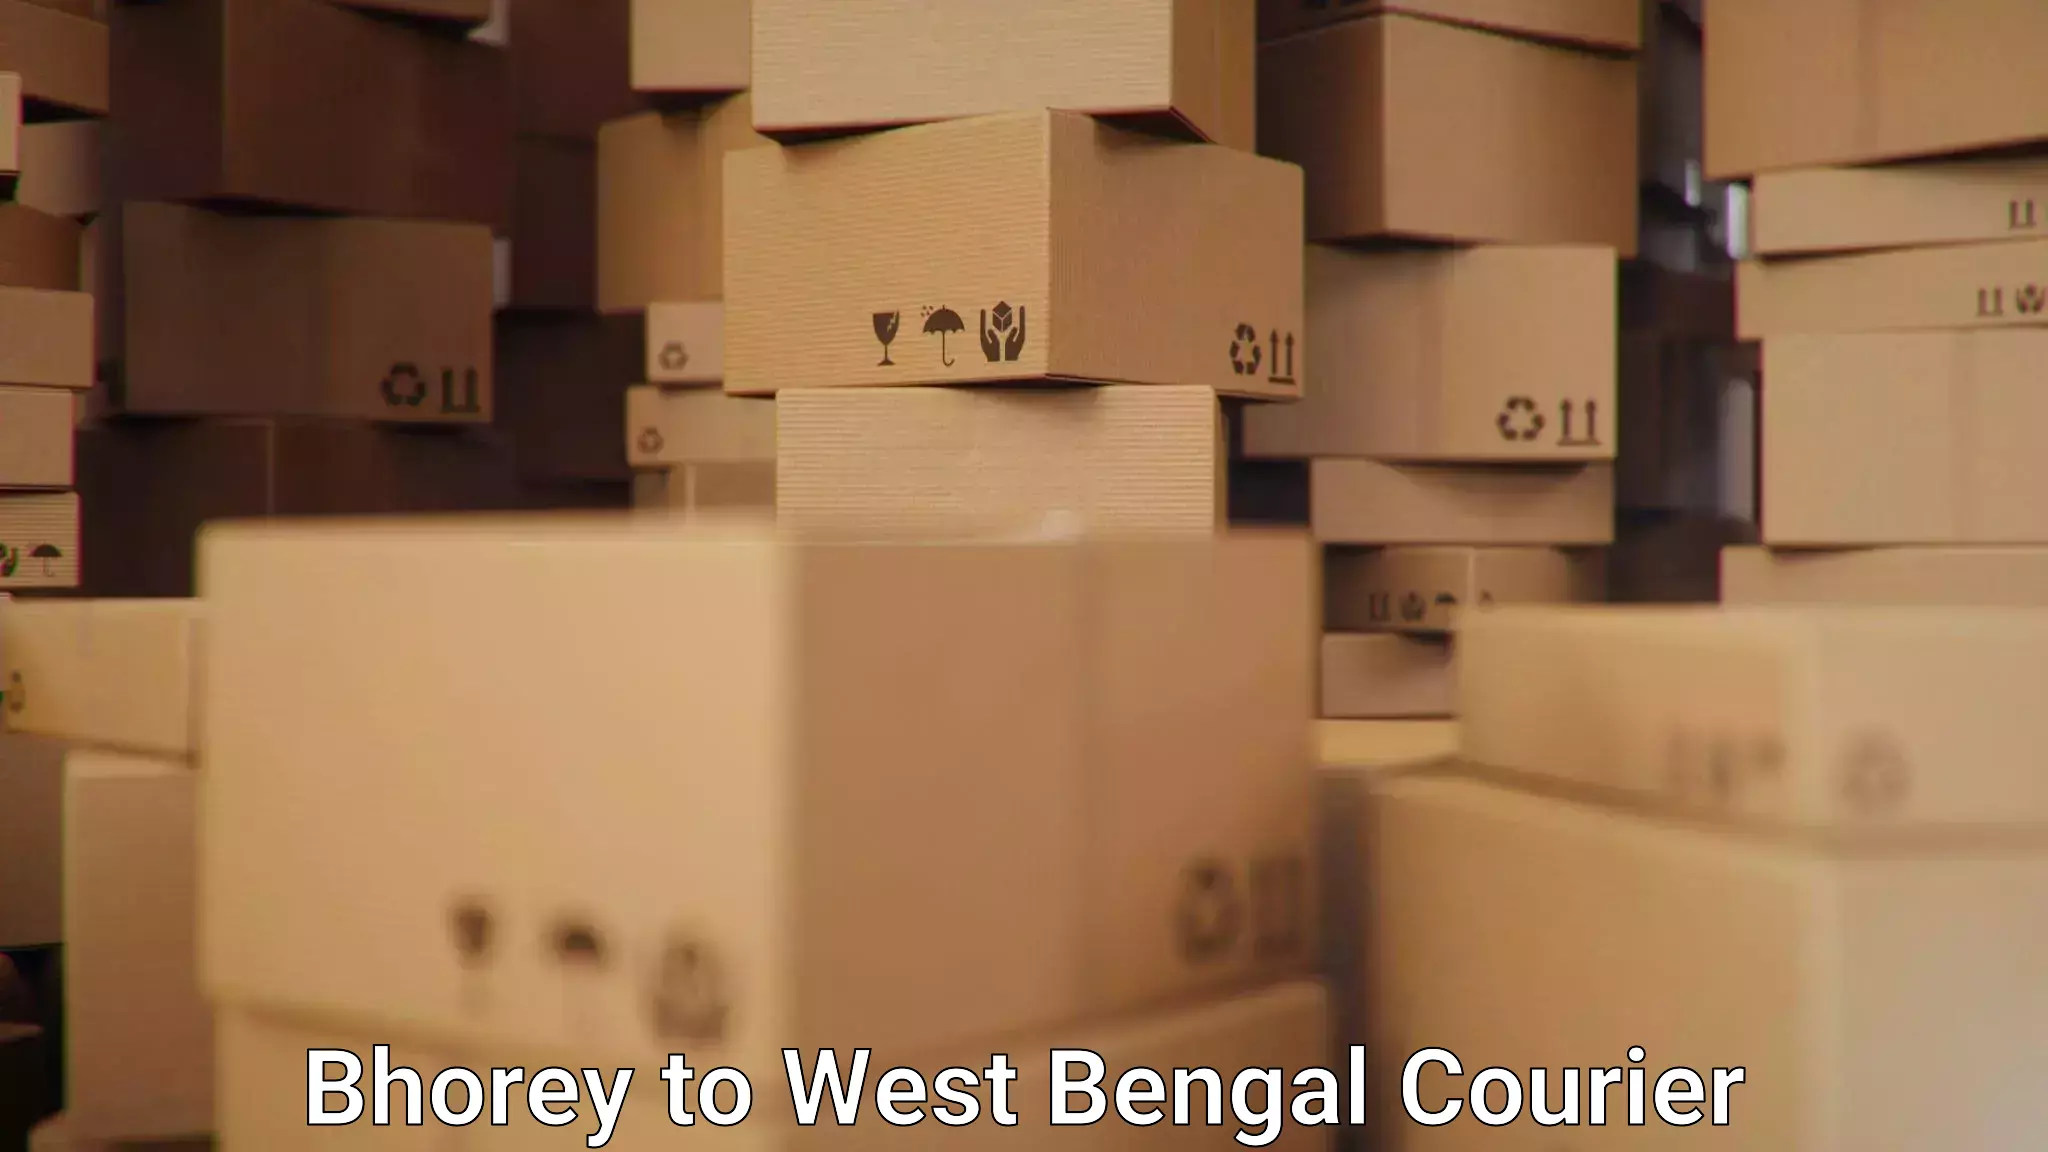 Easy return solutions Bhorey to West Bengal